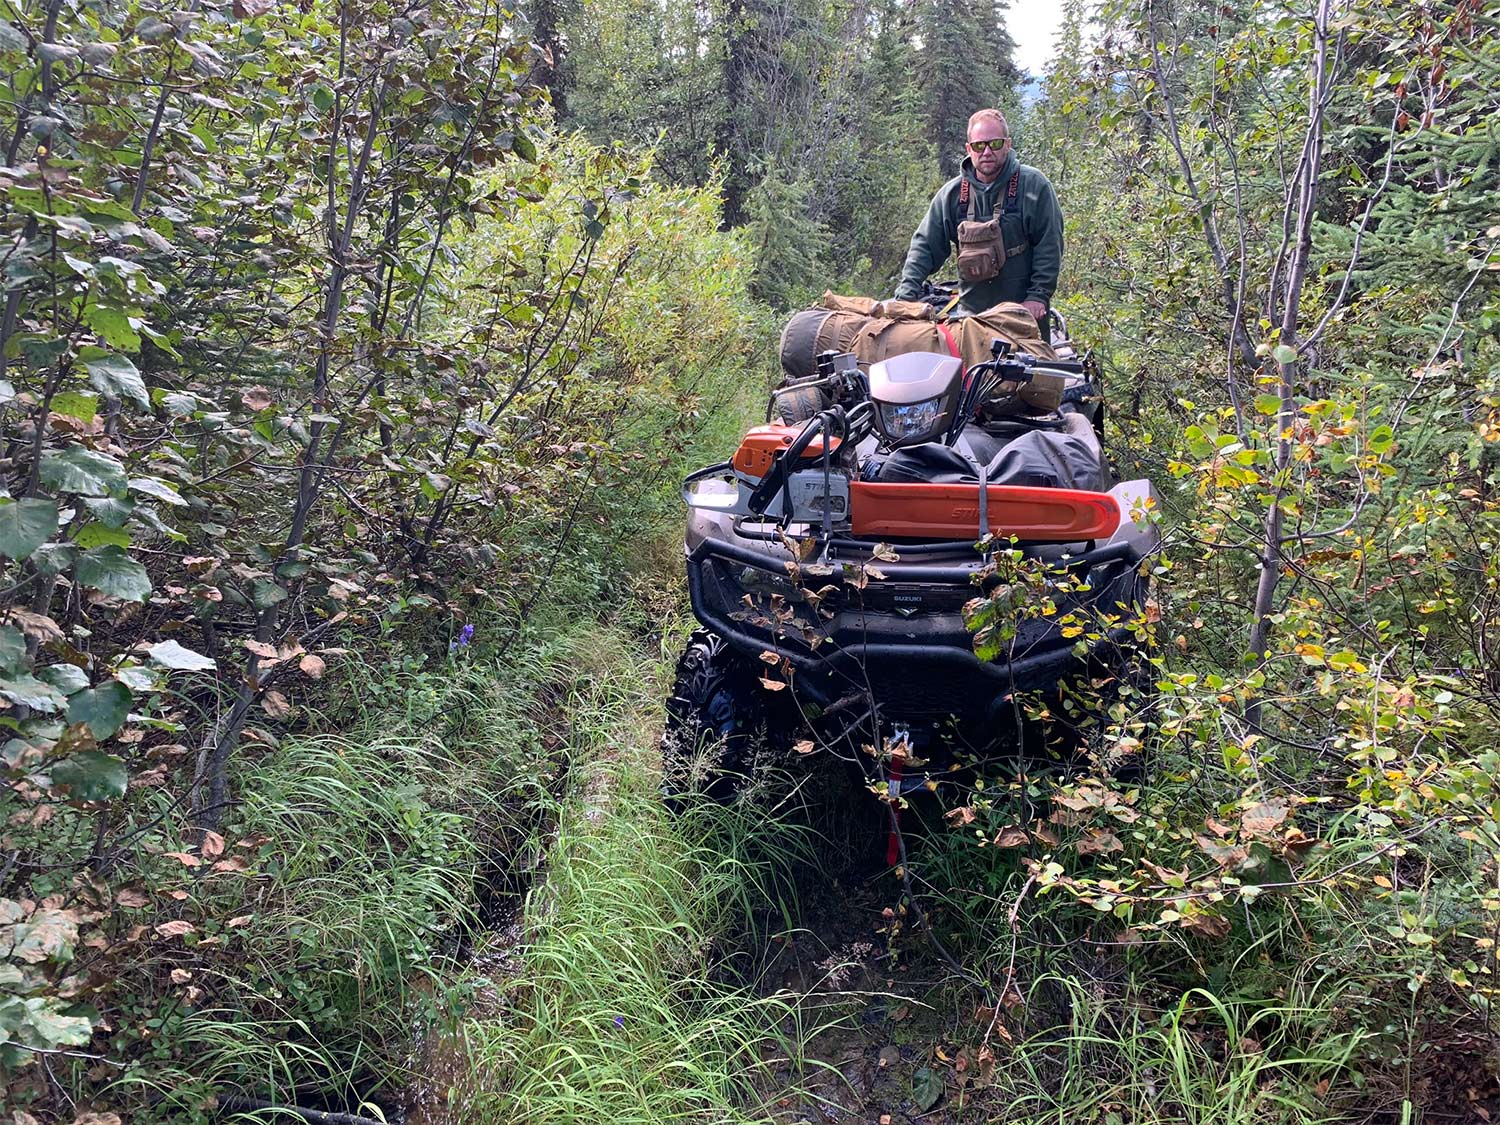 A man on a four-wheeler equiped with brush bumpers.